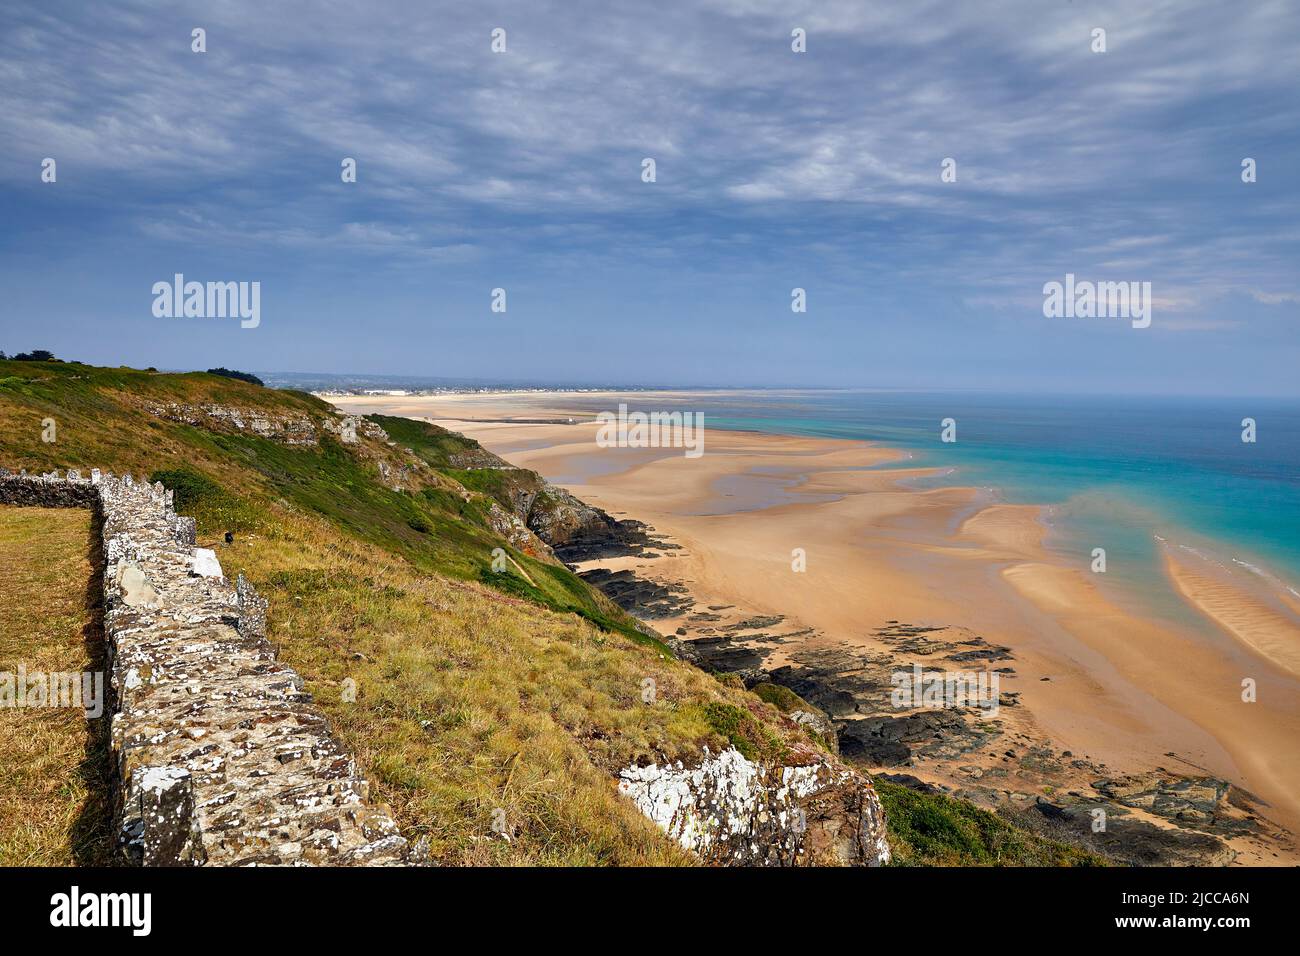 Image of Carteret Plage with the headland in the foreground. Normandy, France Stock Photo